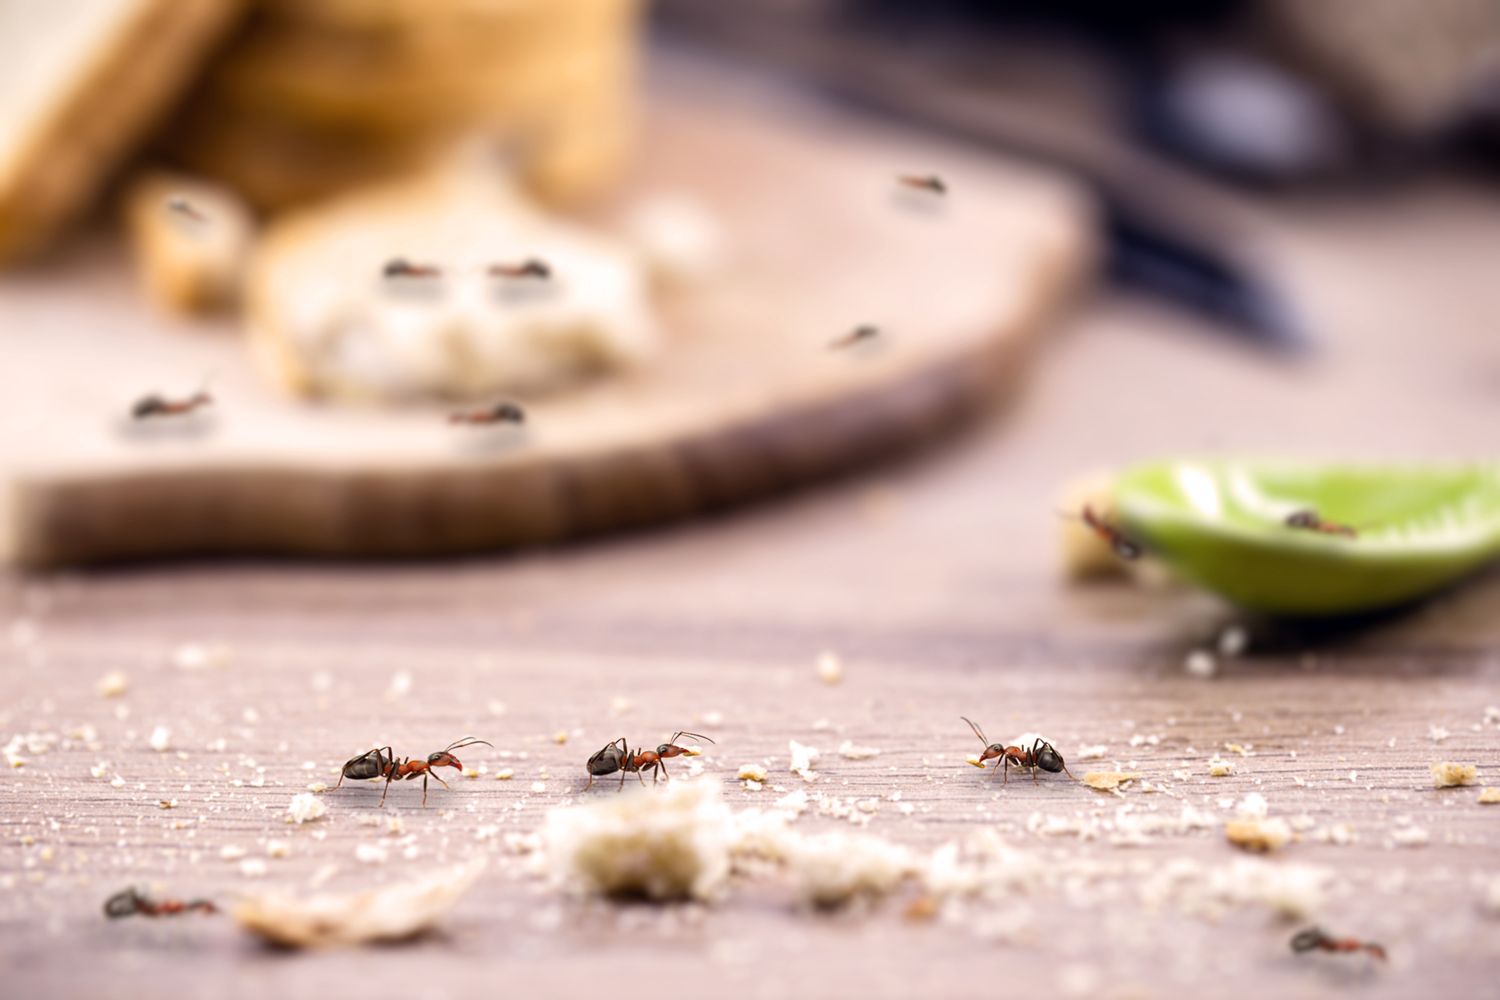  How to Get Rid of Ants in the Kitchen